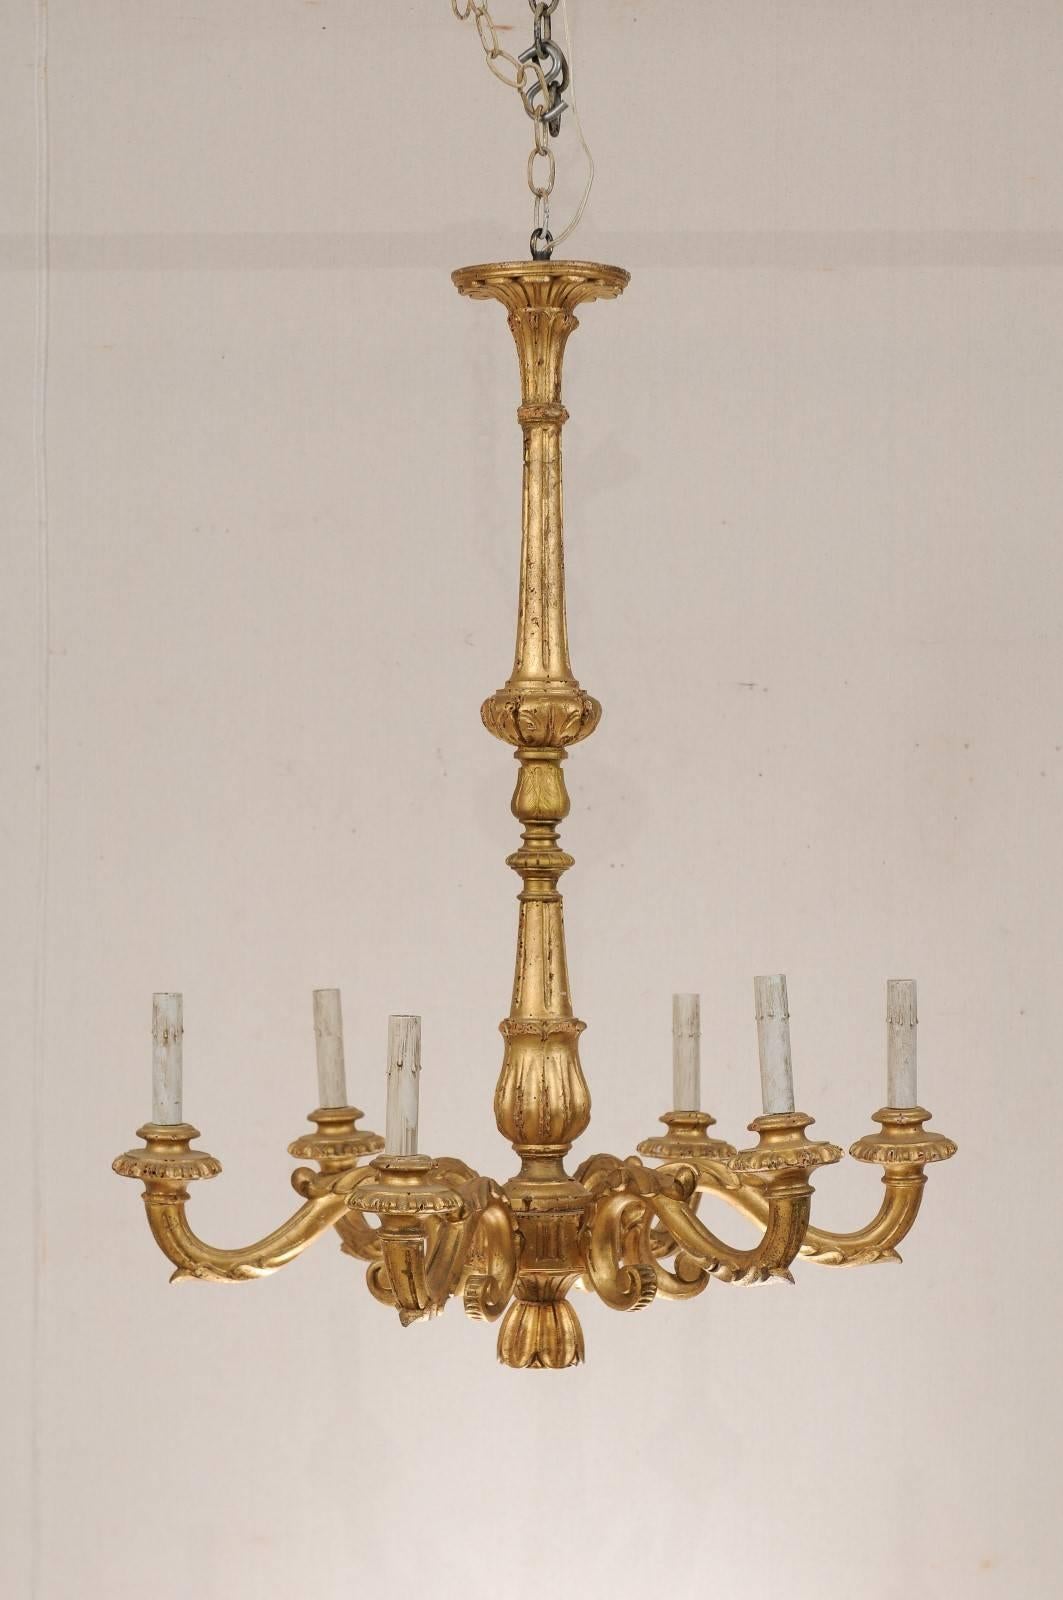 An Italian six-light gilded chandelier. This simple yet elegant early 20th century Italian chandelier would add charm to any space. This piece has an elongated slender central column that reaches from the top to the bottom and has nice acanthus leaf